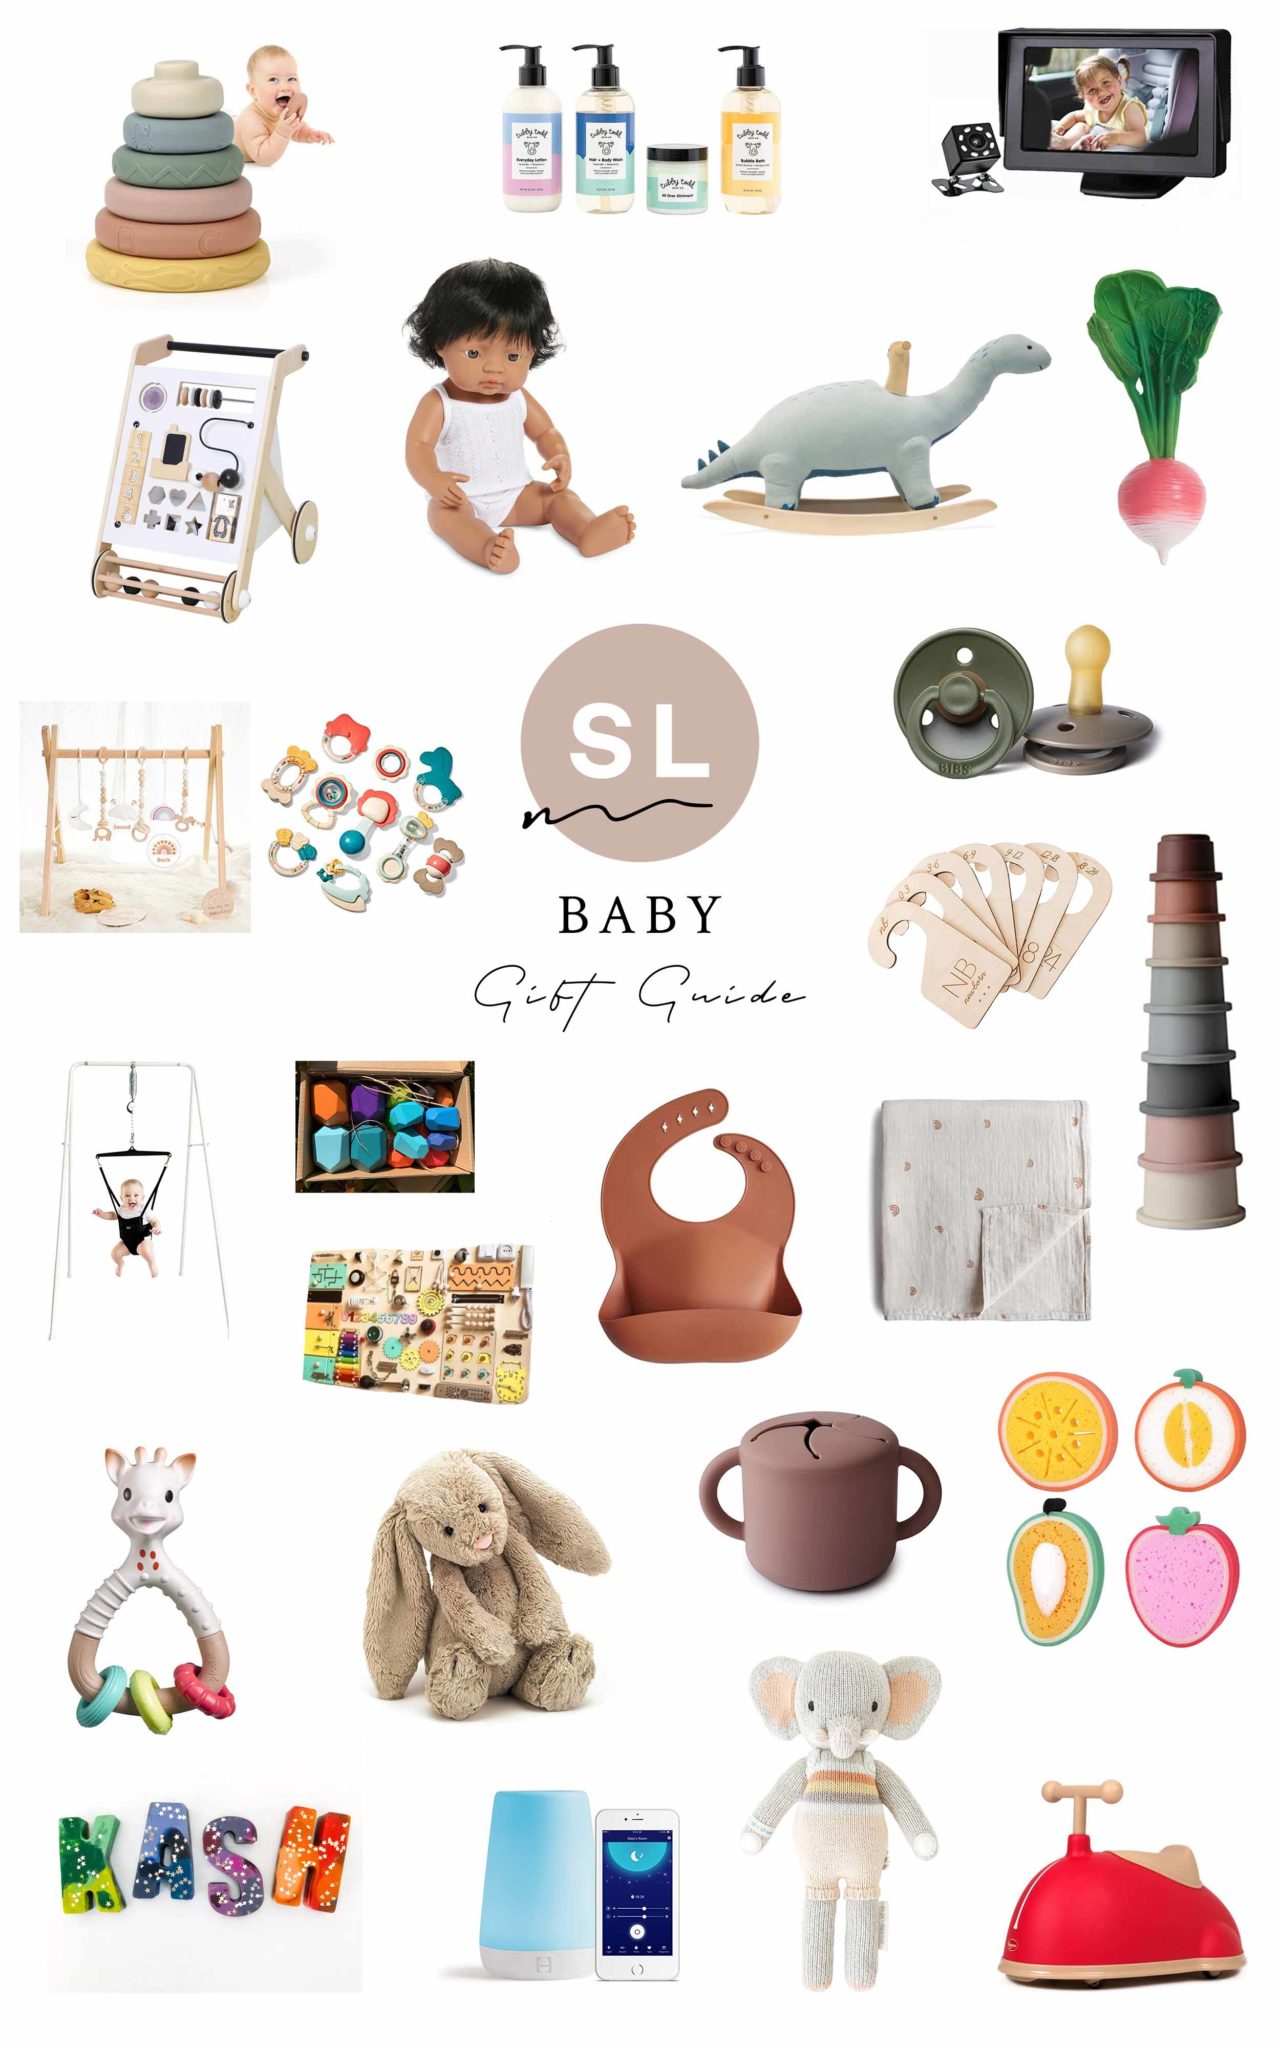 The Best Kids & Baby Holiday Gift Guides 2021